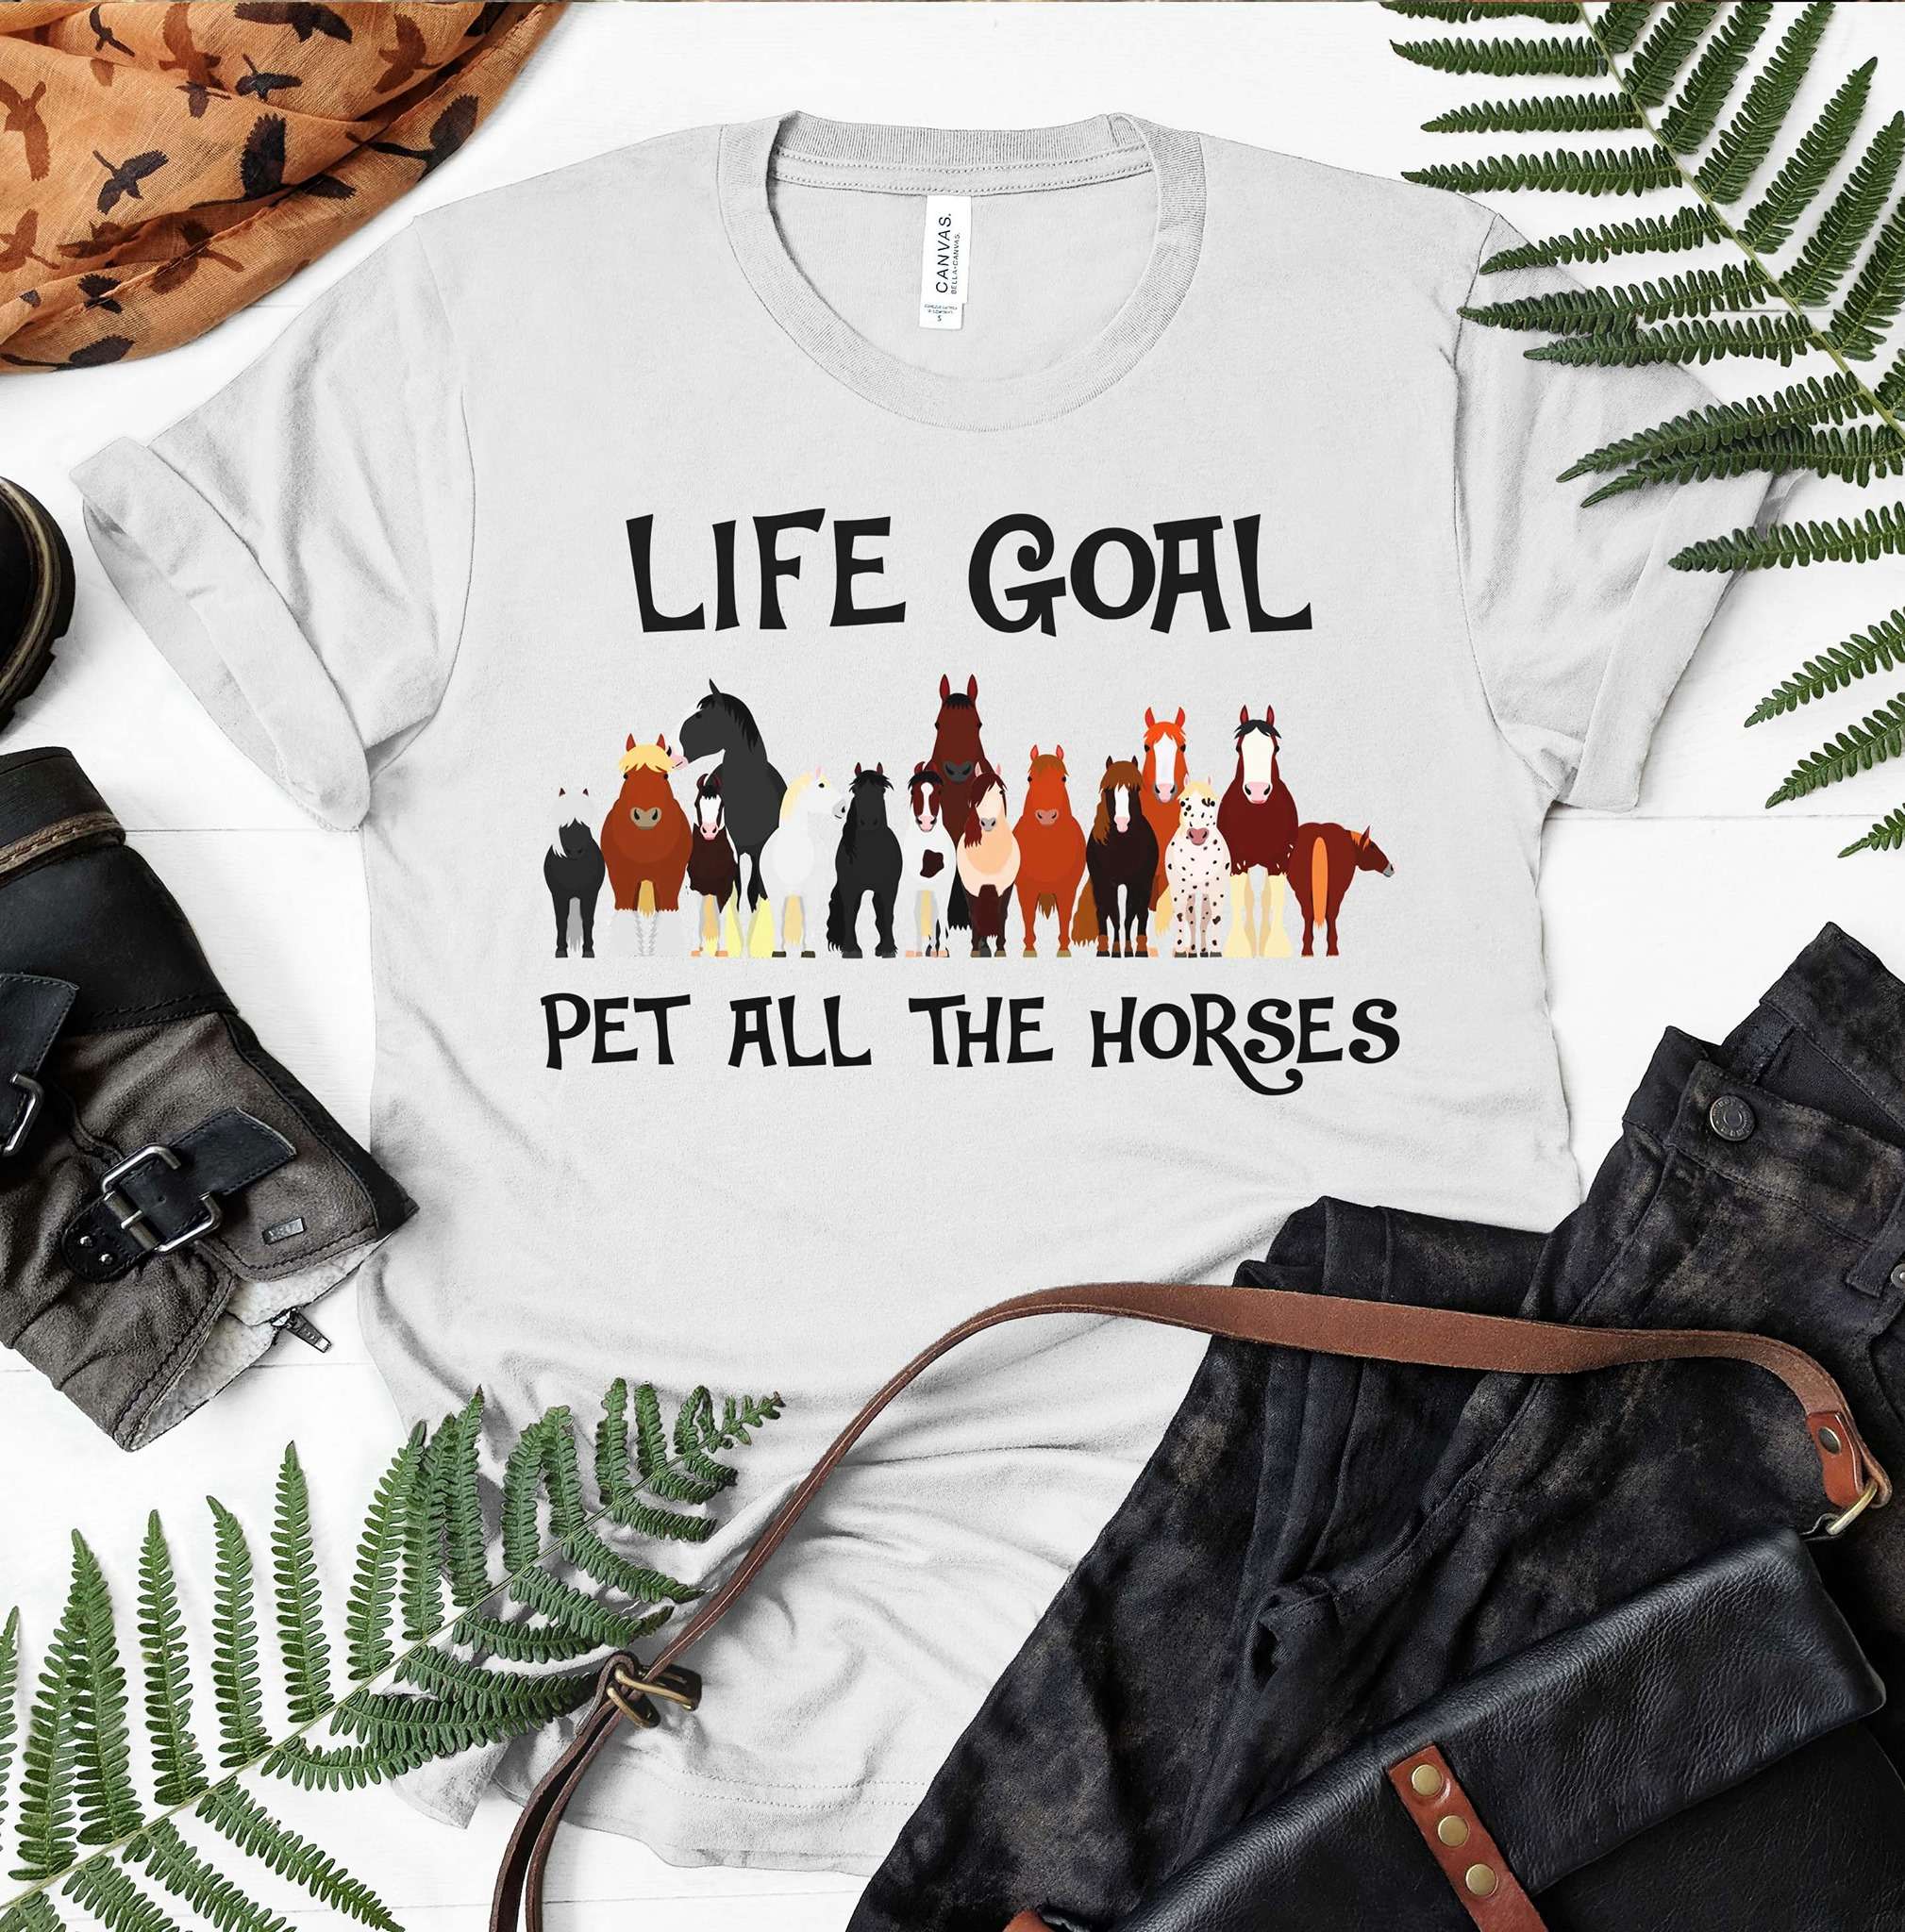 The Horse Tees Gift - Life goal pet all the horses